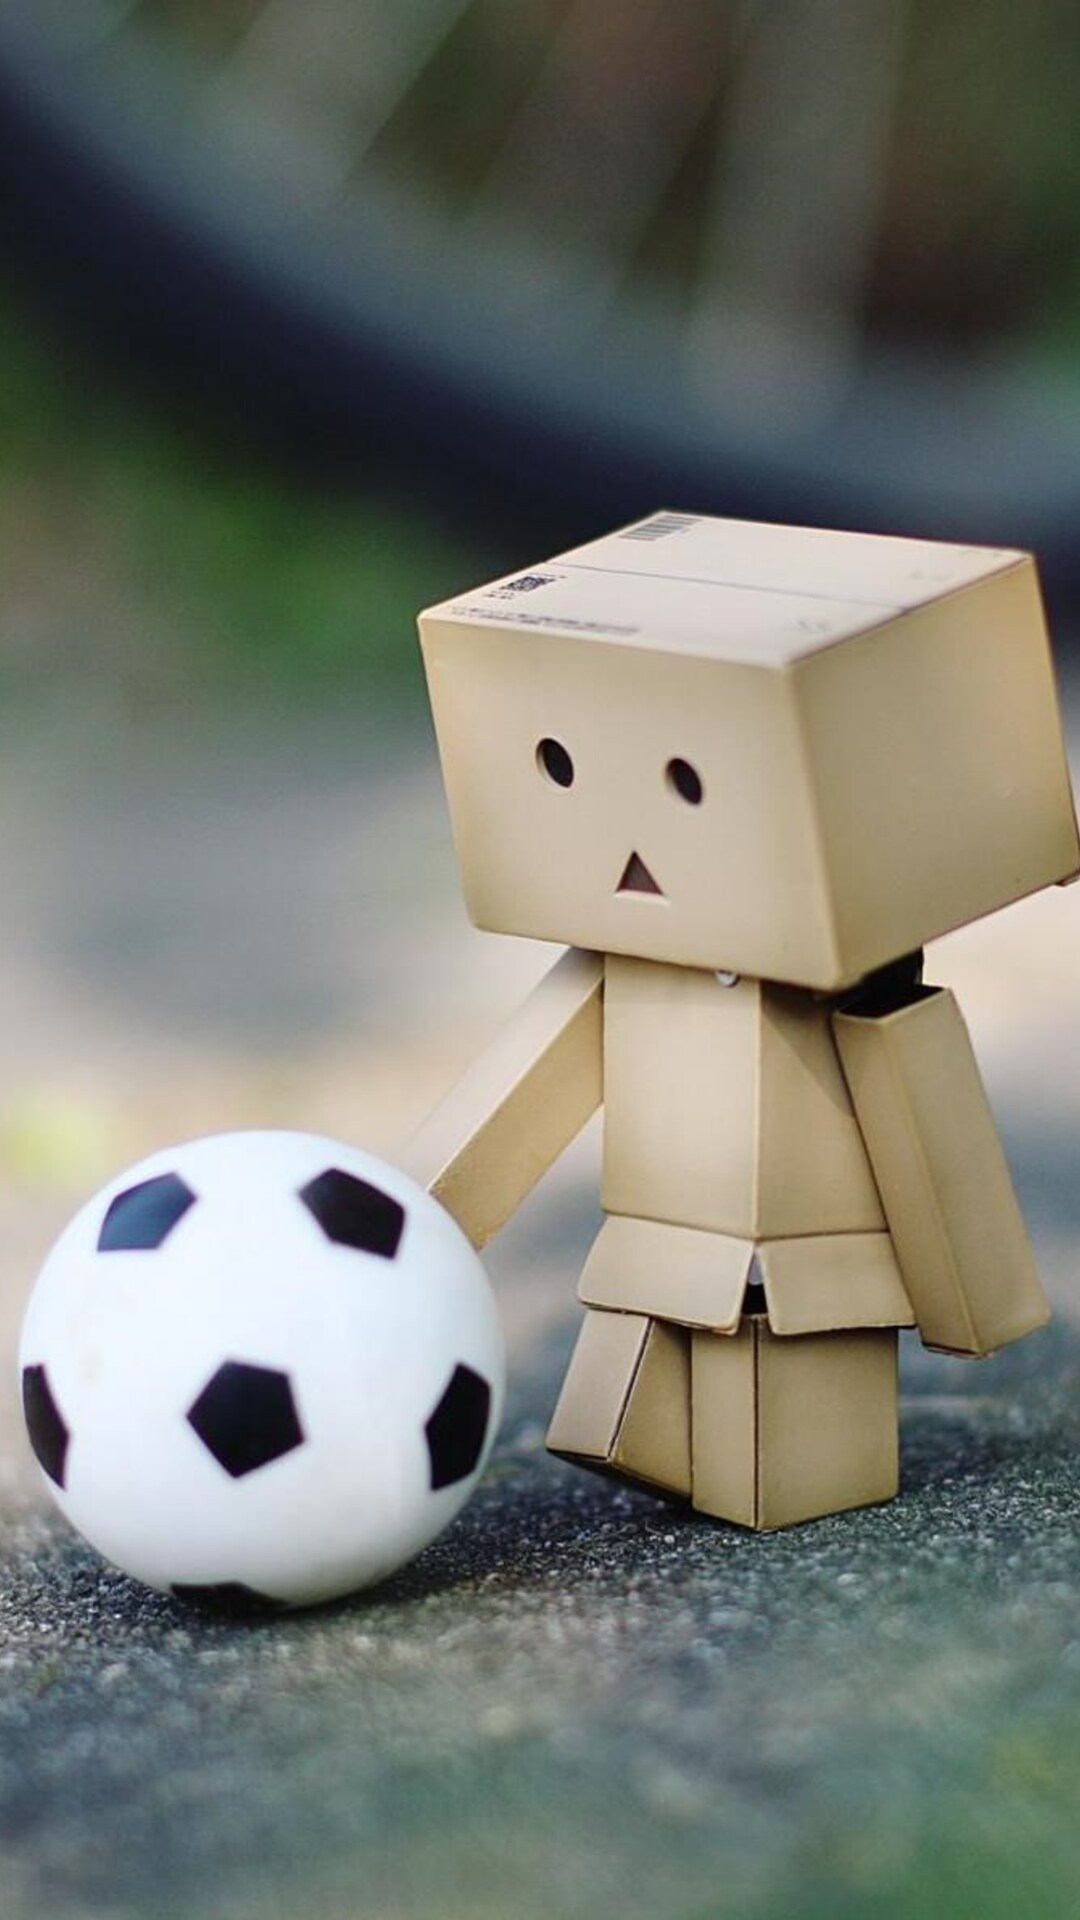 1080x1920 Danbo Soccer Fan Iphone 7,6s,6 Plus, Pixel xl ,One Plus 3,3t,5 HD 4k Wallpapers, Images, Backgrounds, Photos and Pictures